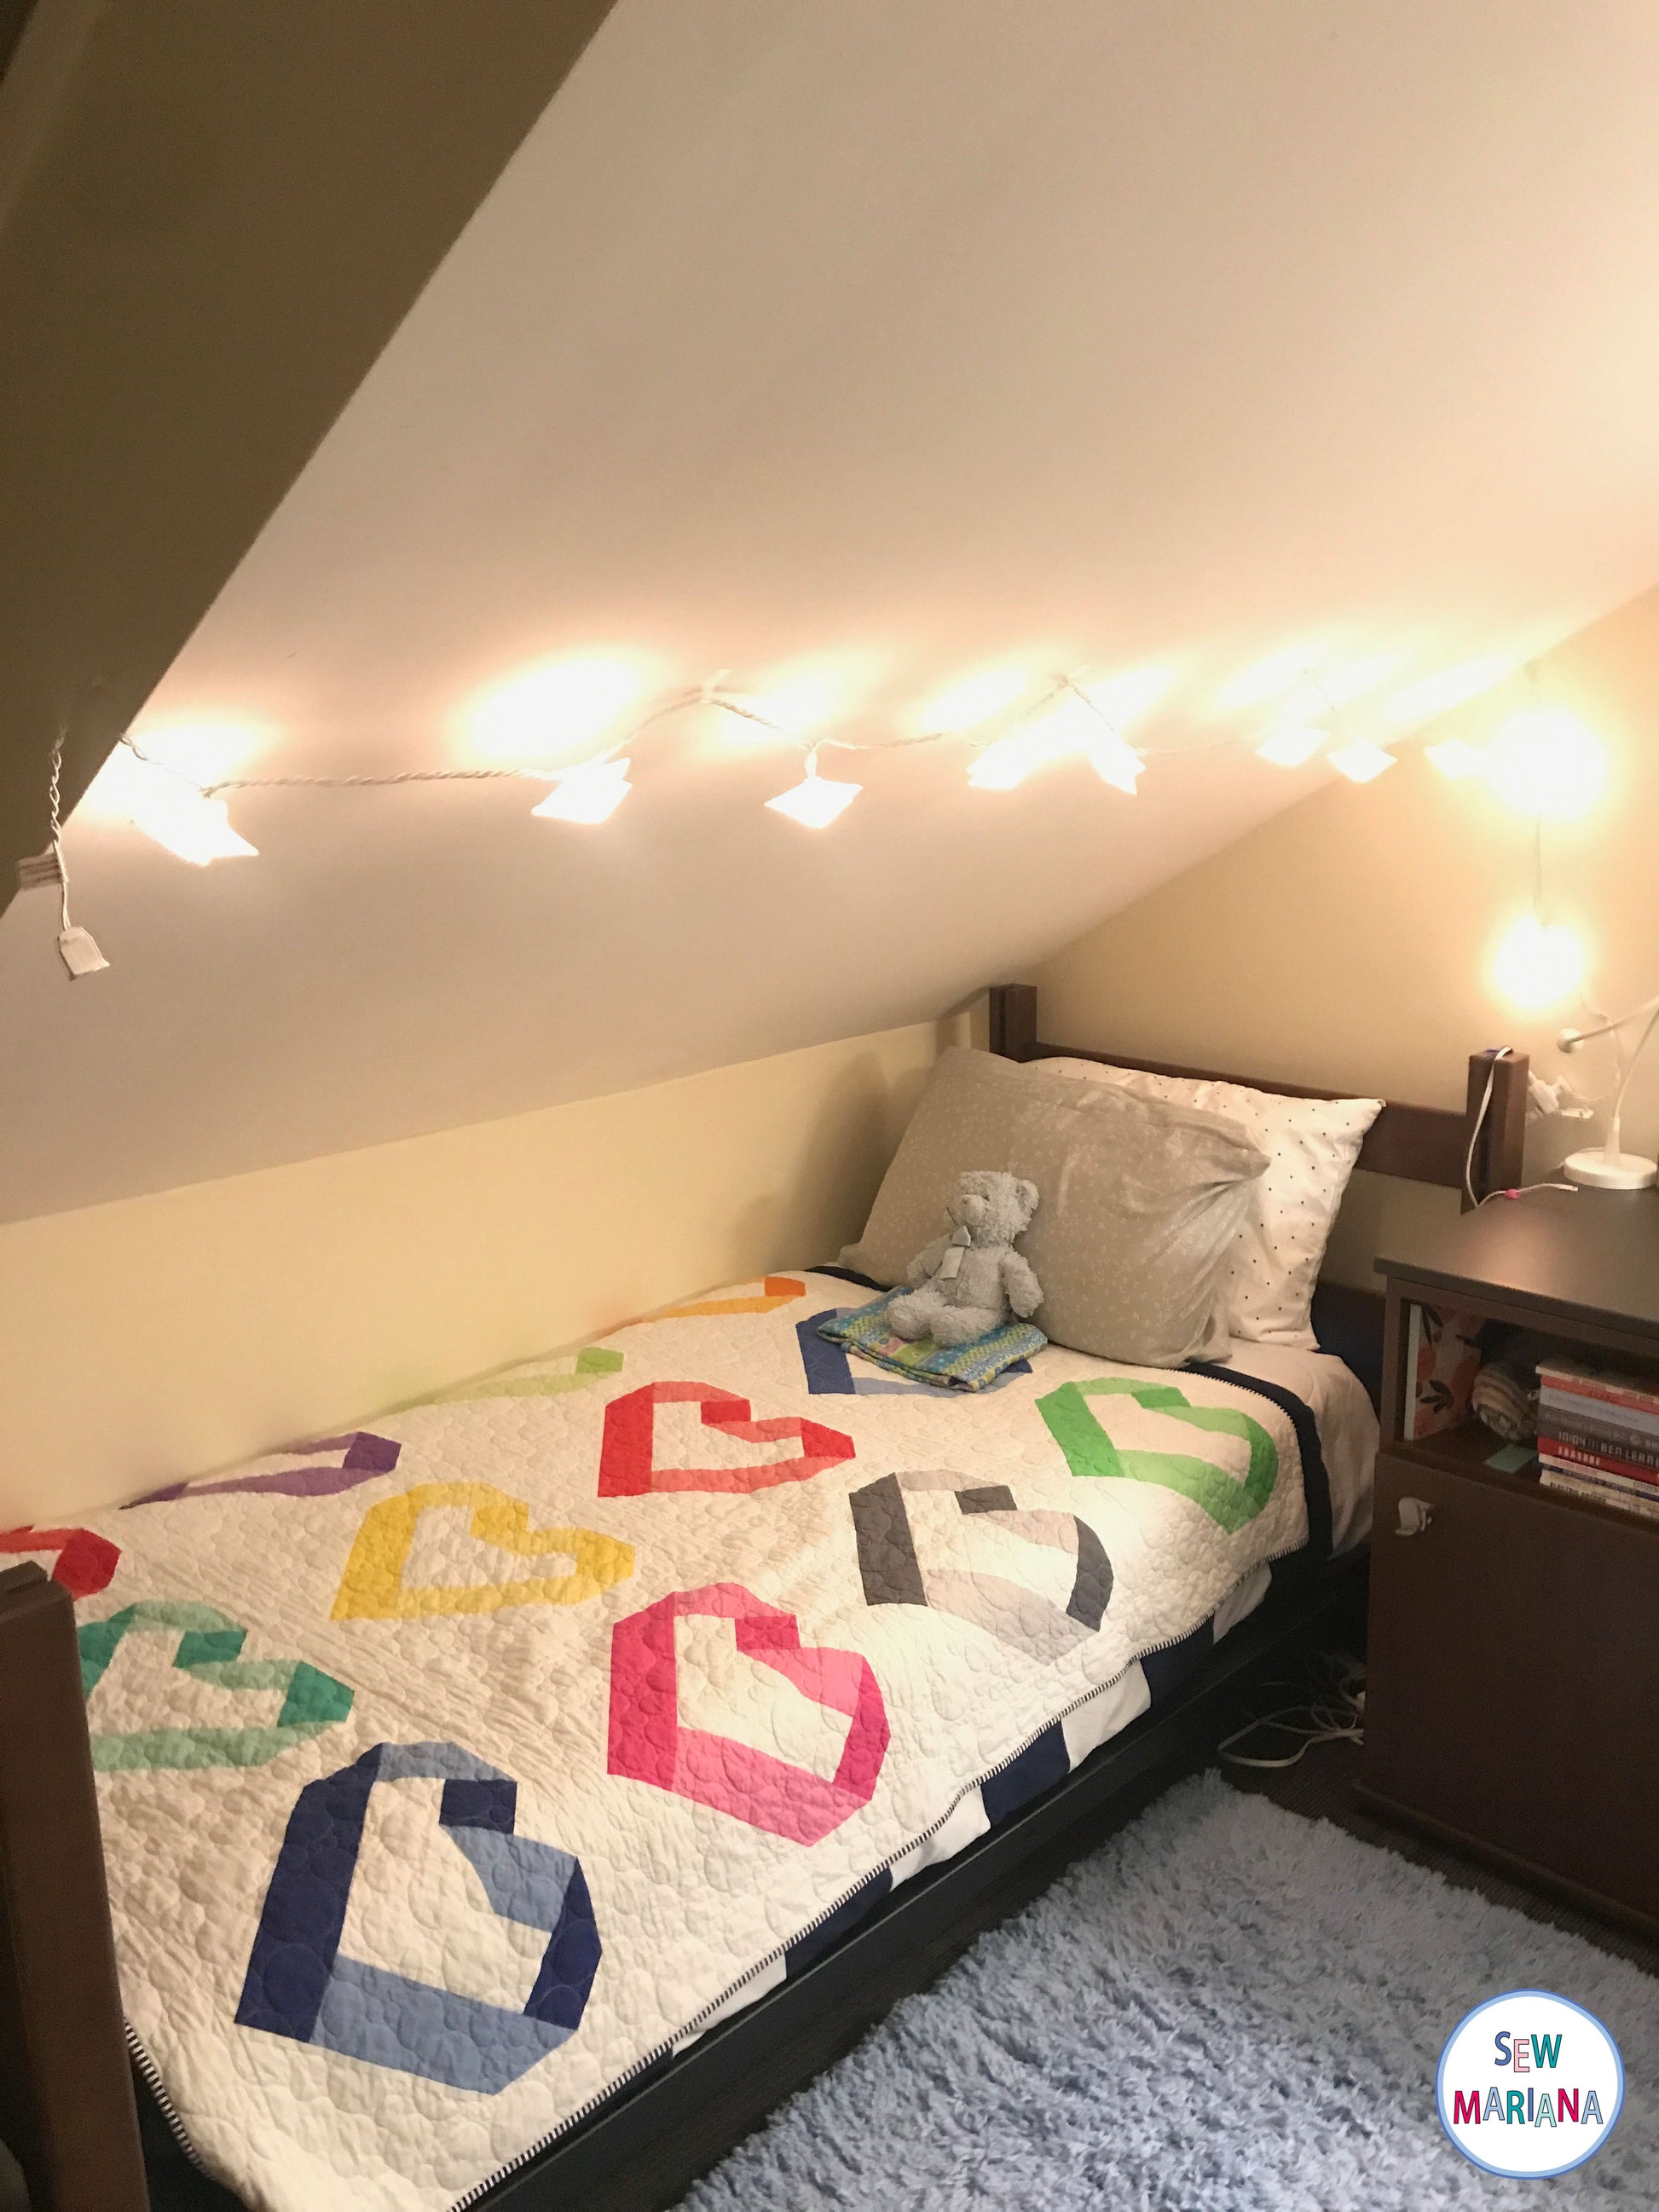 the in my heart quilt on a dorm bed